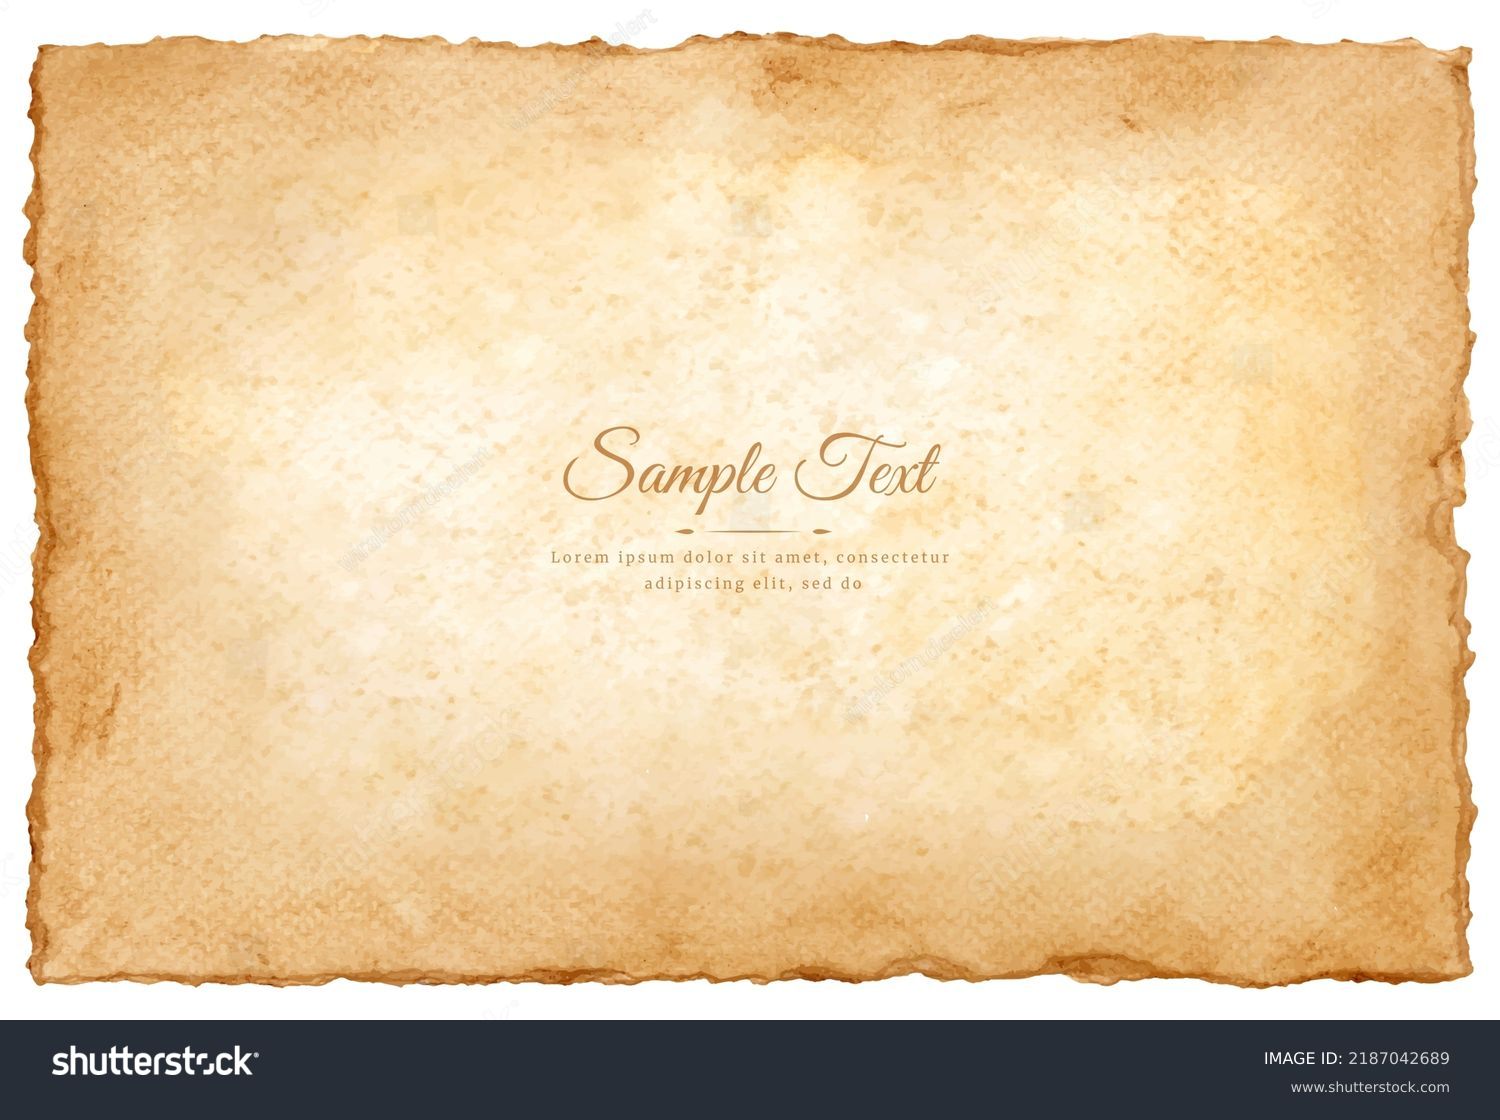 Vector old parchment paper sheet vintage aged or texture isolated on white background. #2187042689